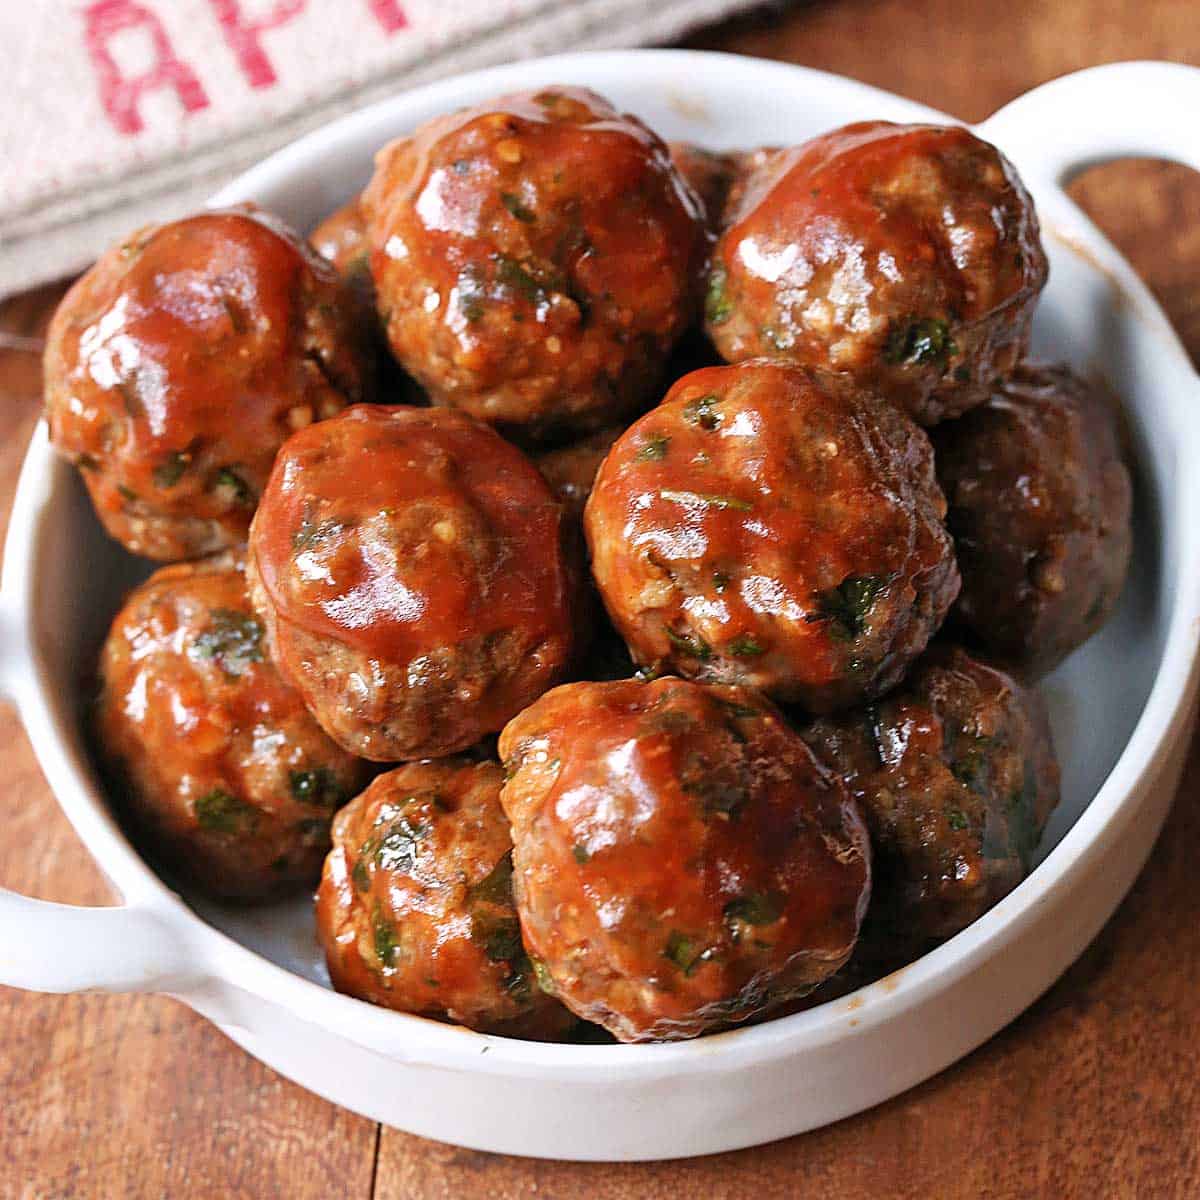 Glazed keto meatballs are served in a white bowl.